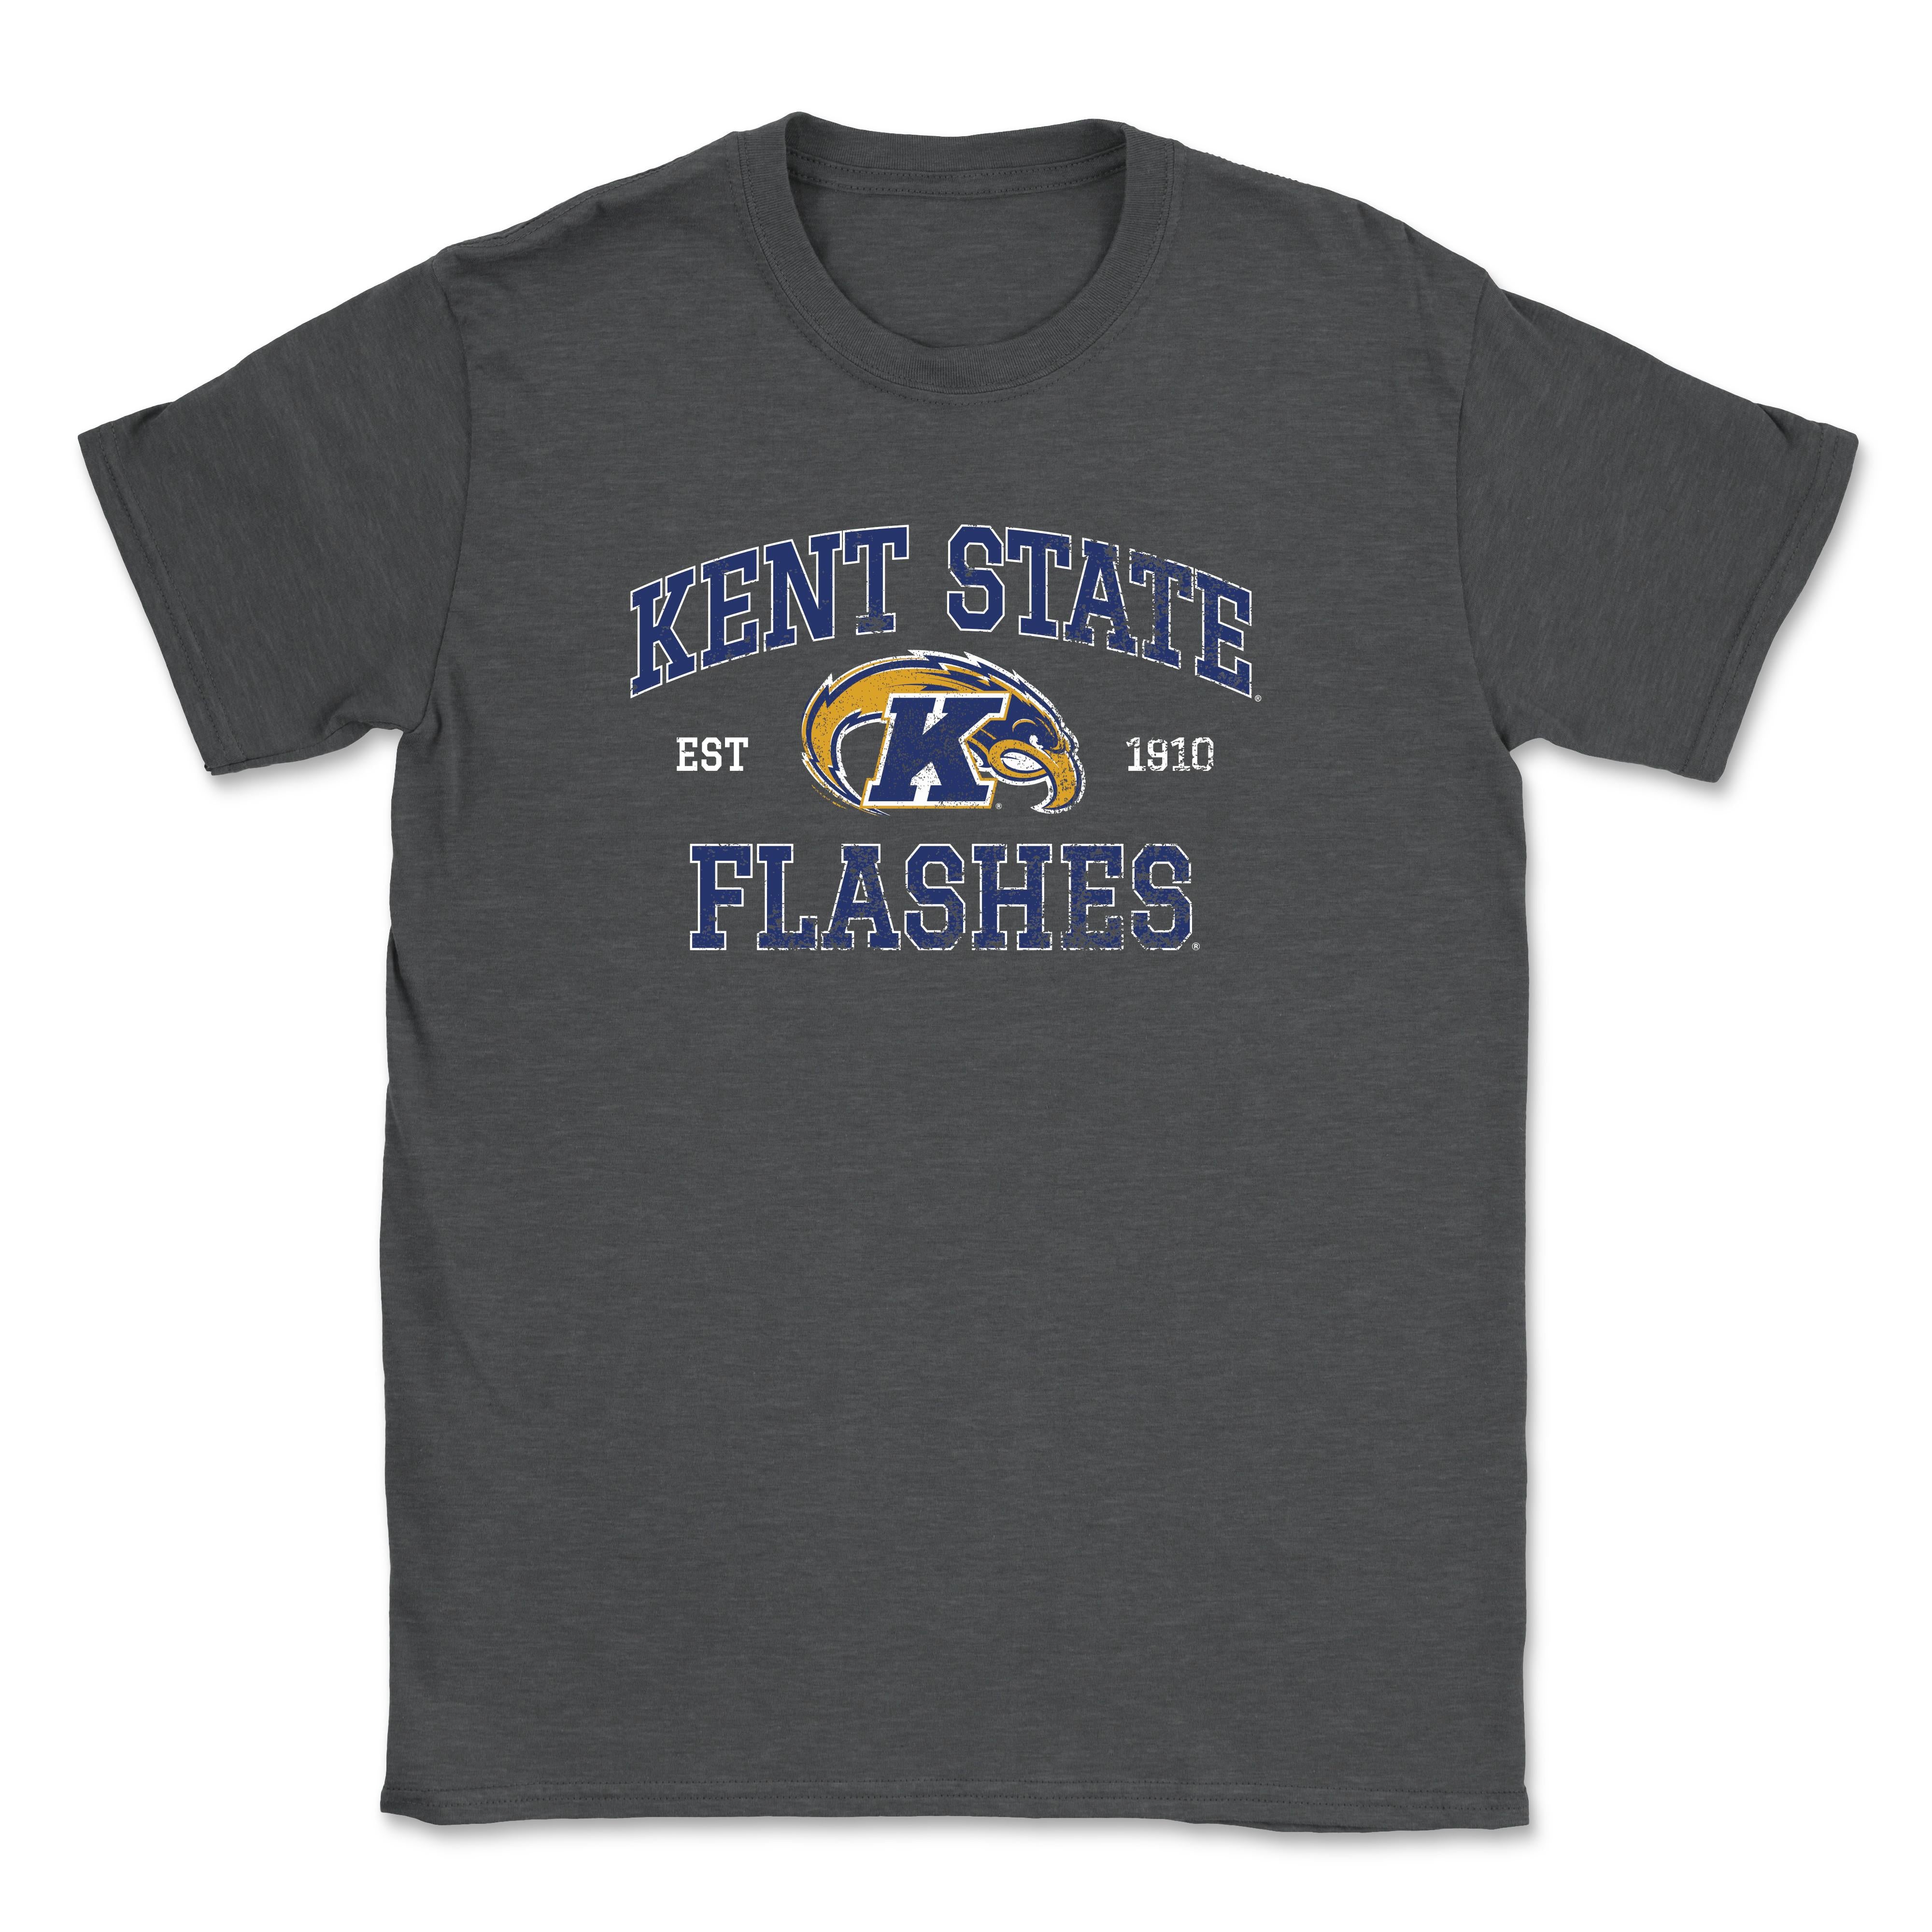 Kent State Gray Arched Distress Eagle And Date  T-Shirt